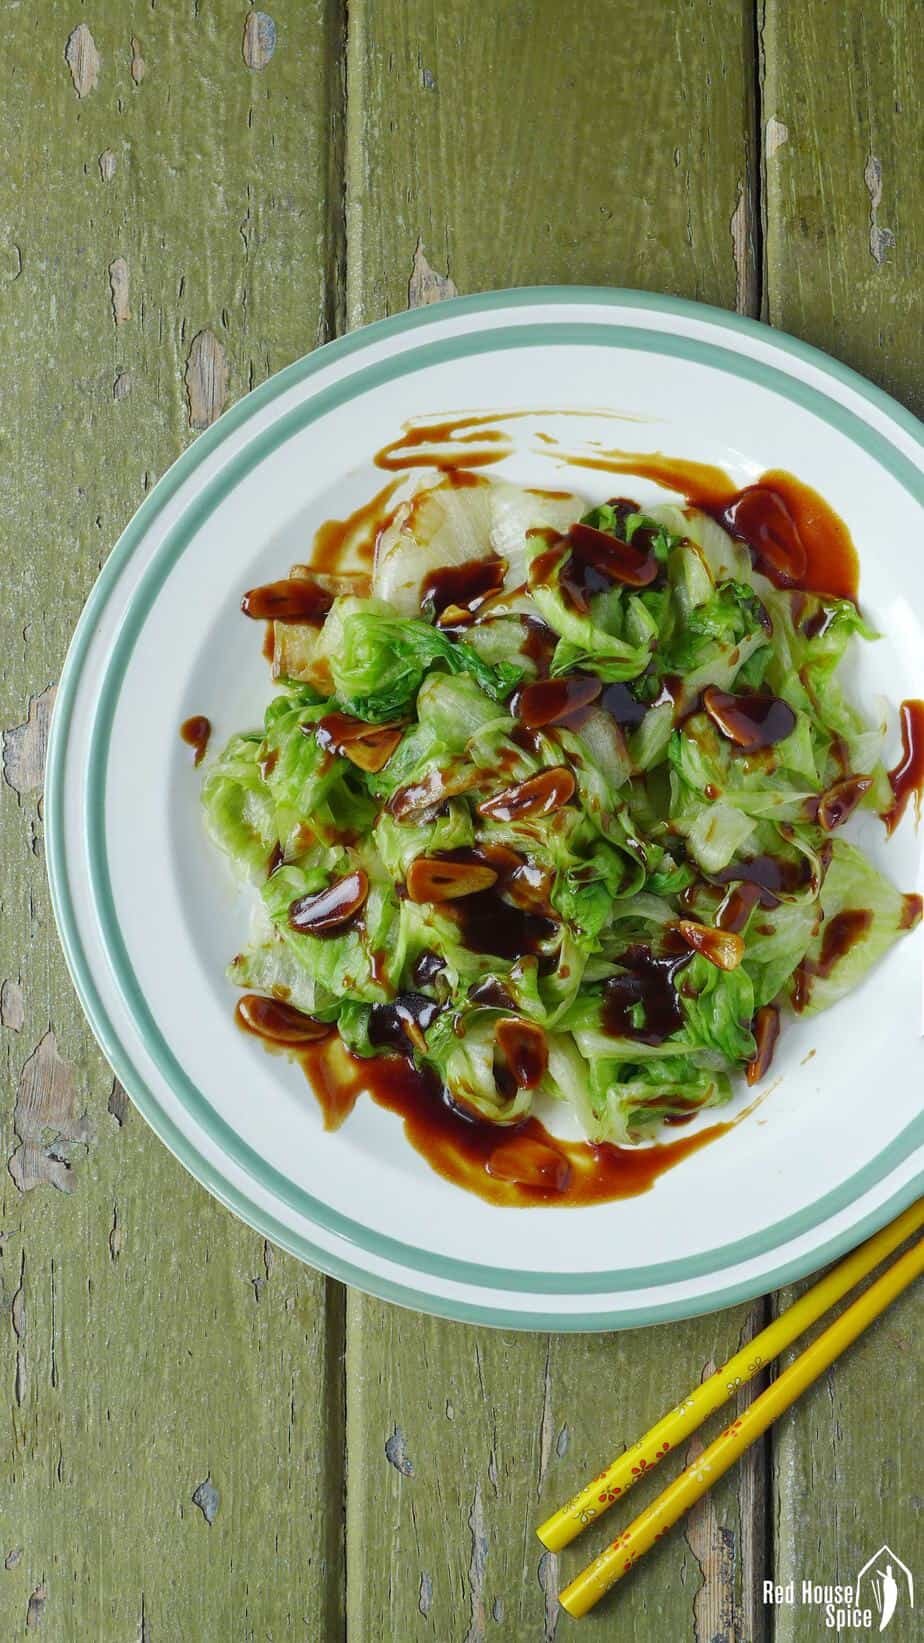 Iceberg Lettuce with Oyster Sauce